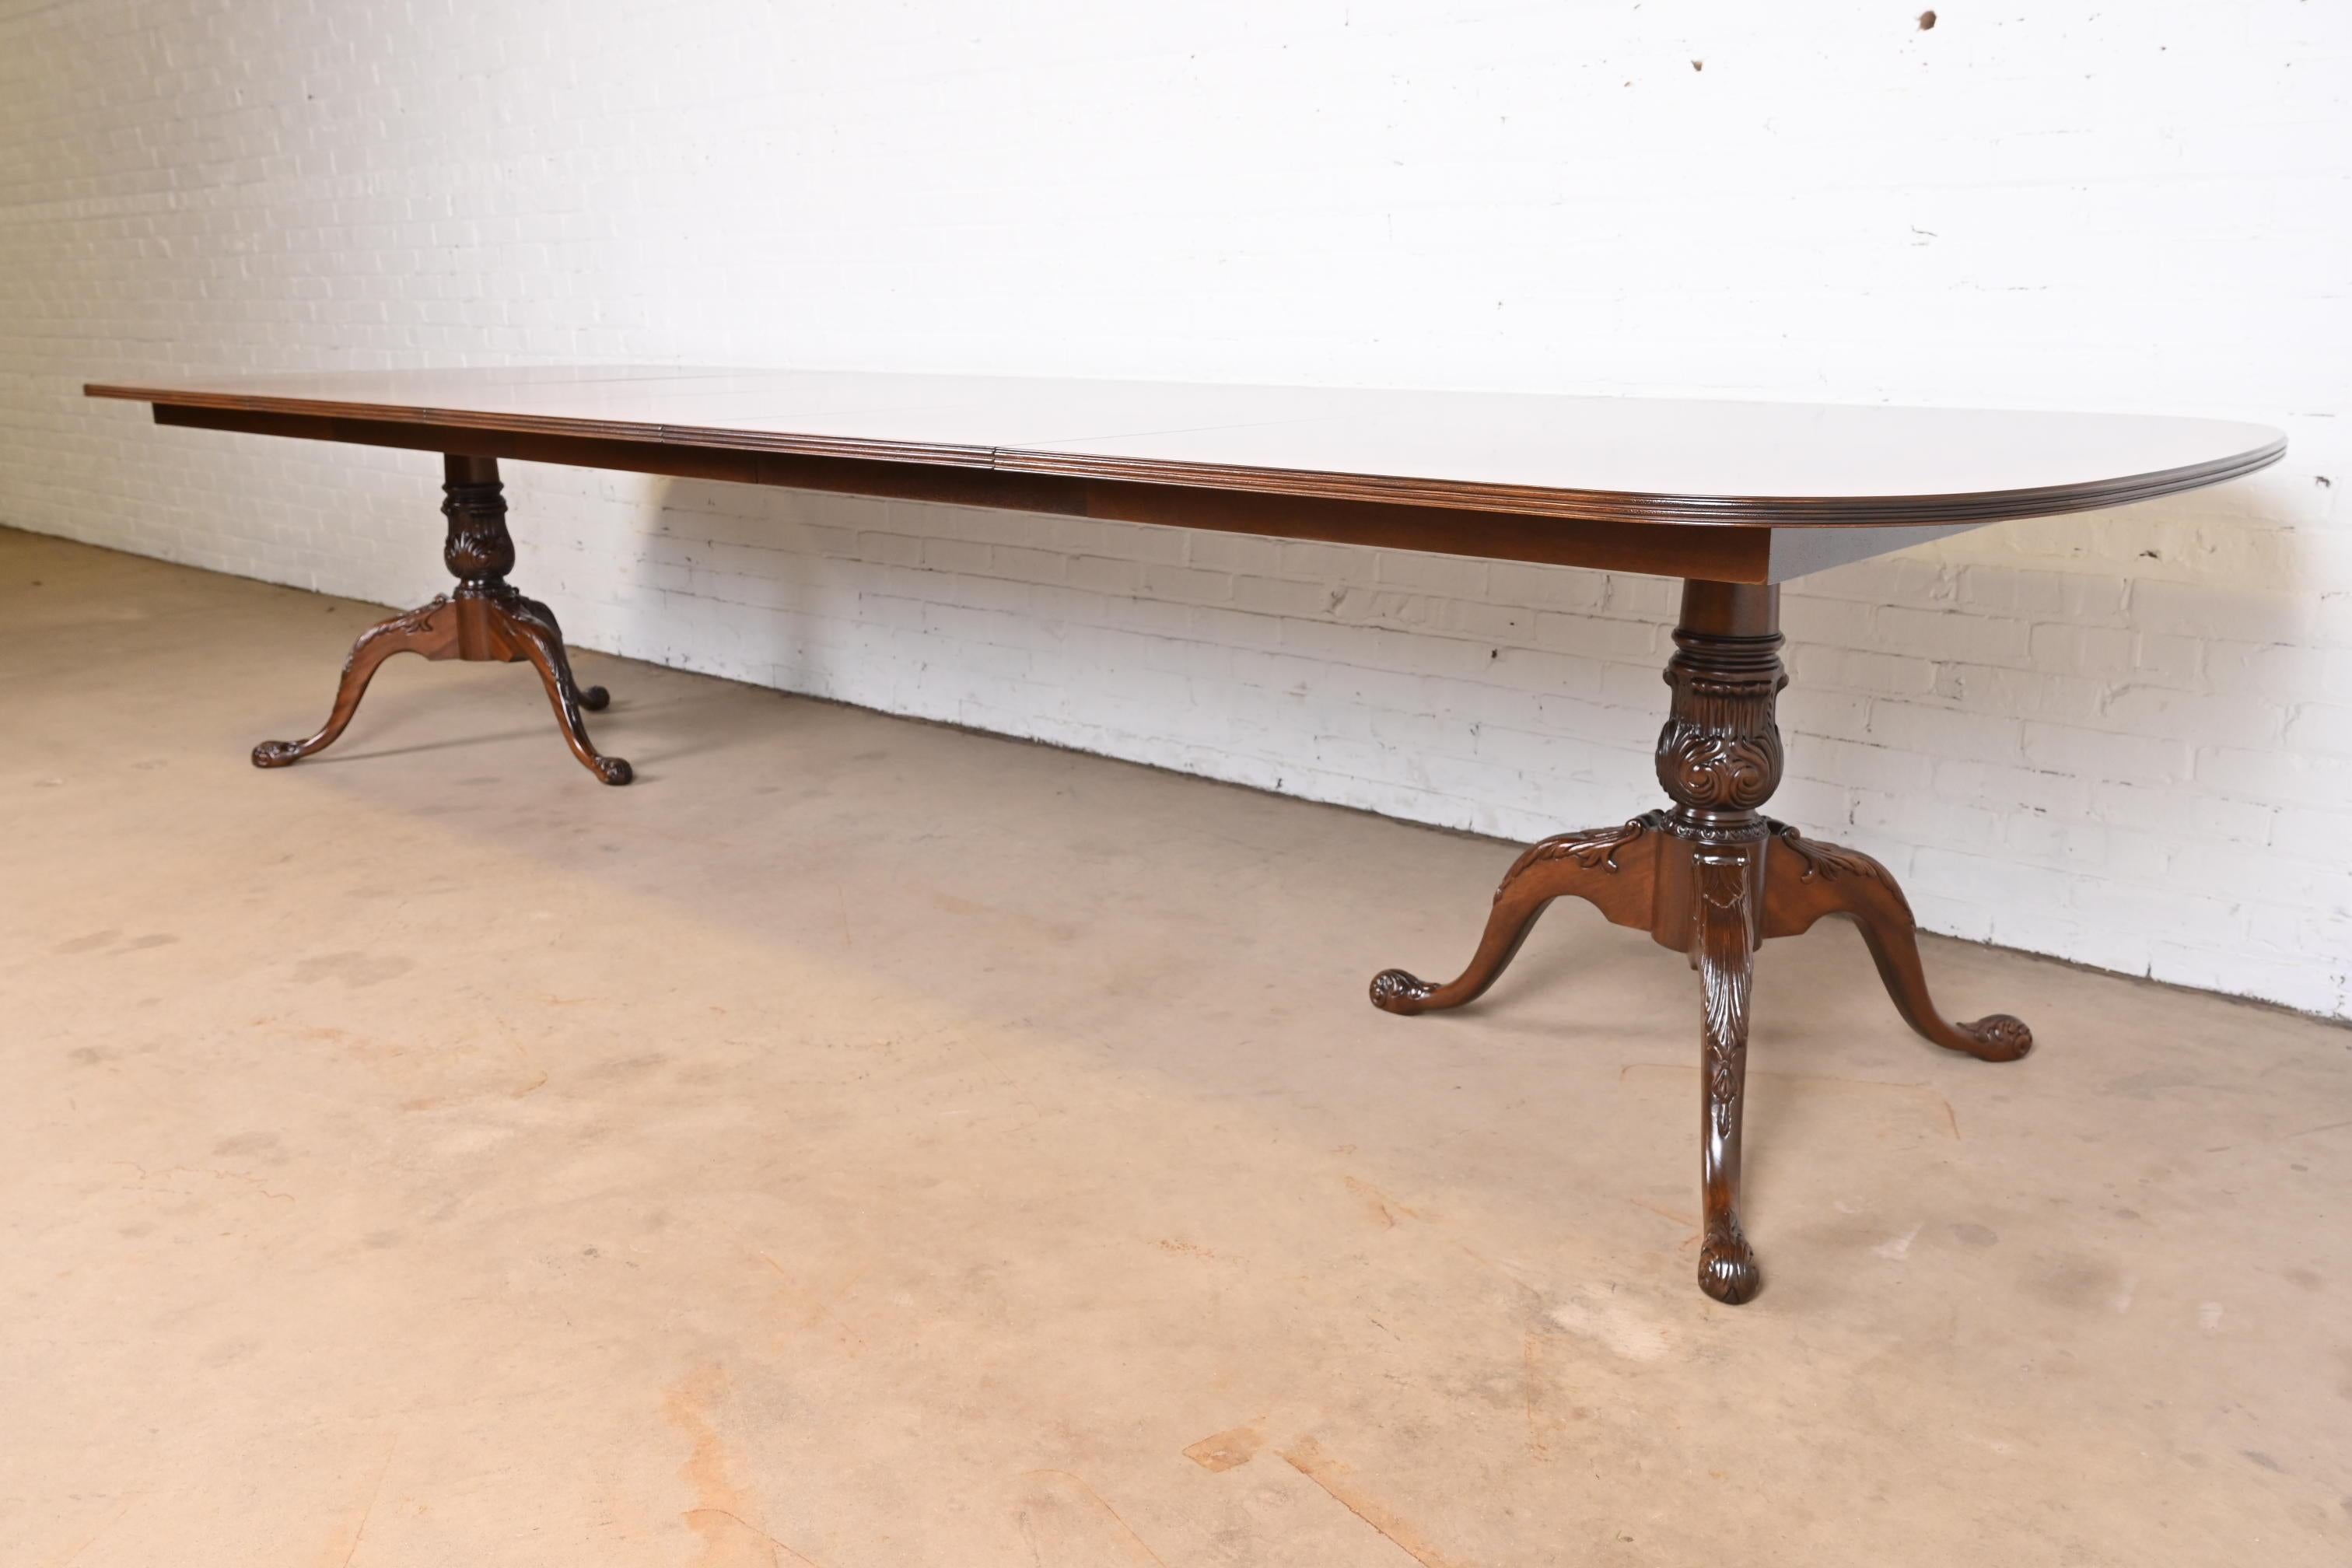 20th Century Drexel Heritage Georgian Mahogany Double Pedestal Dining Table, Newly Refinished